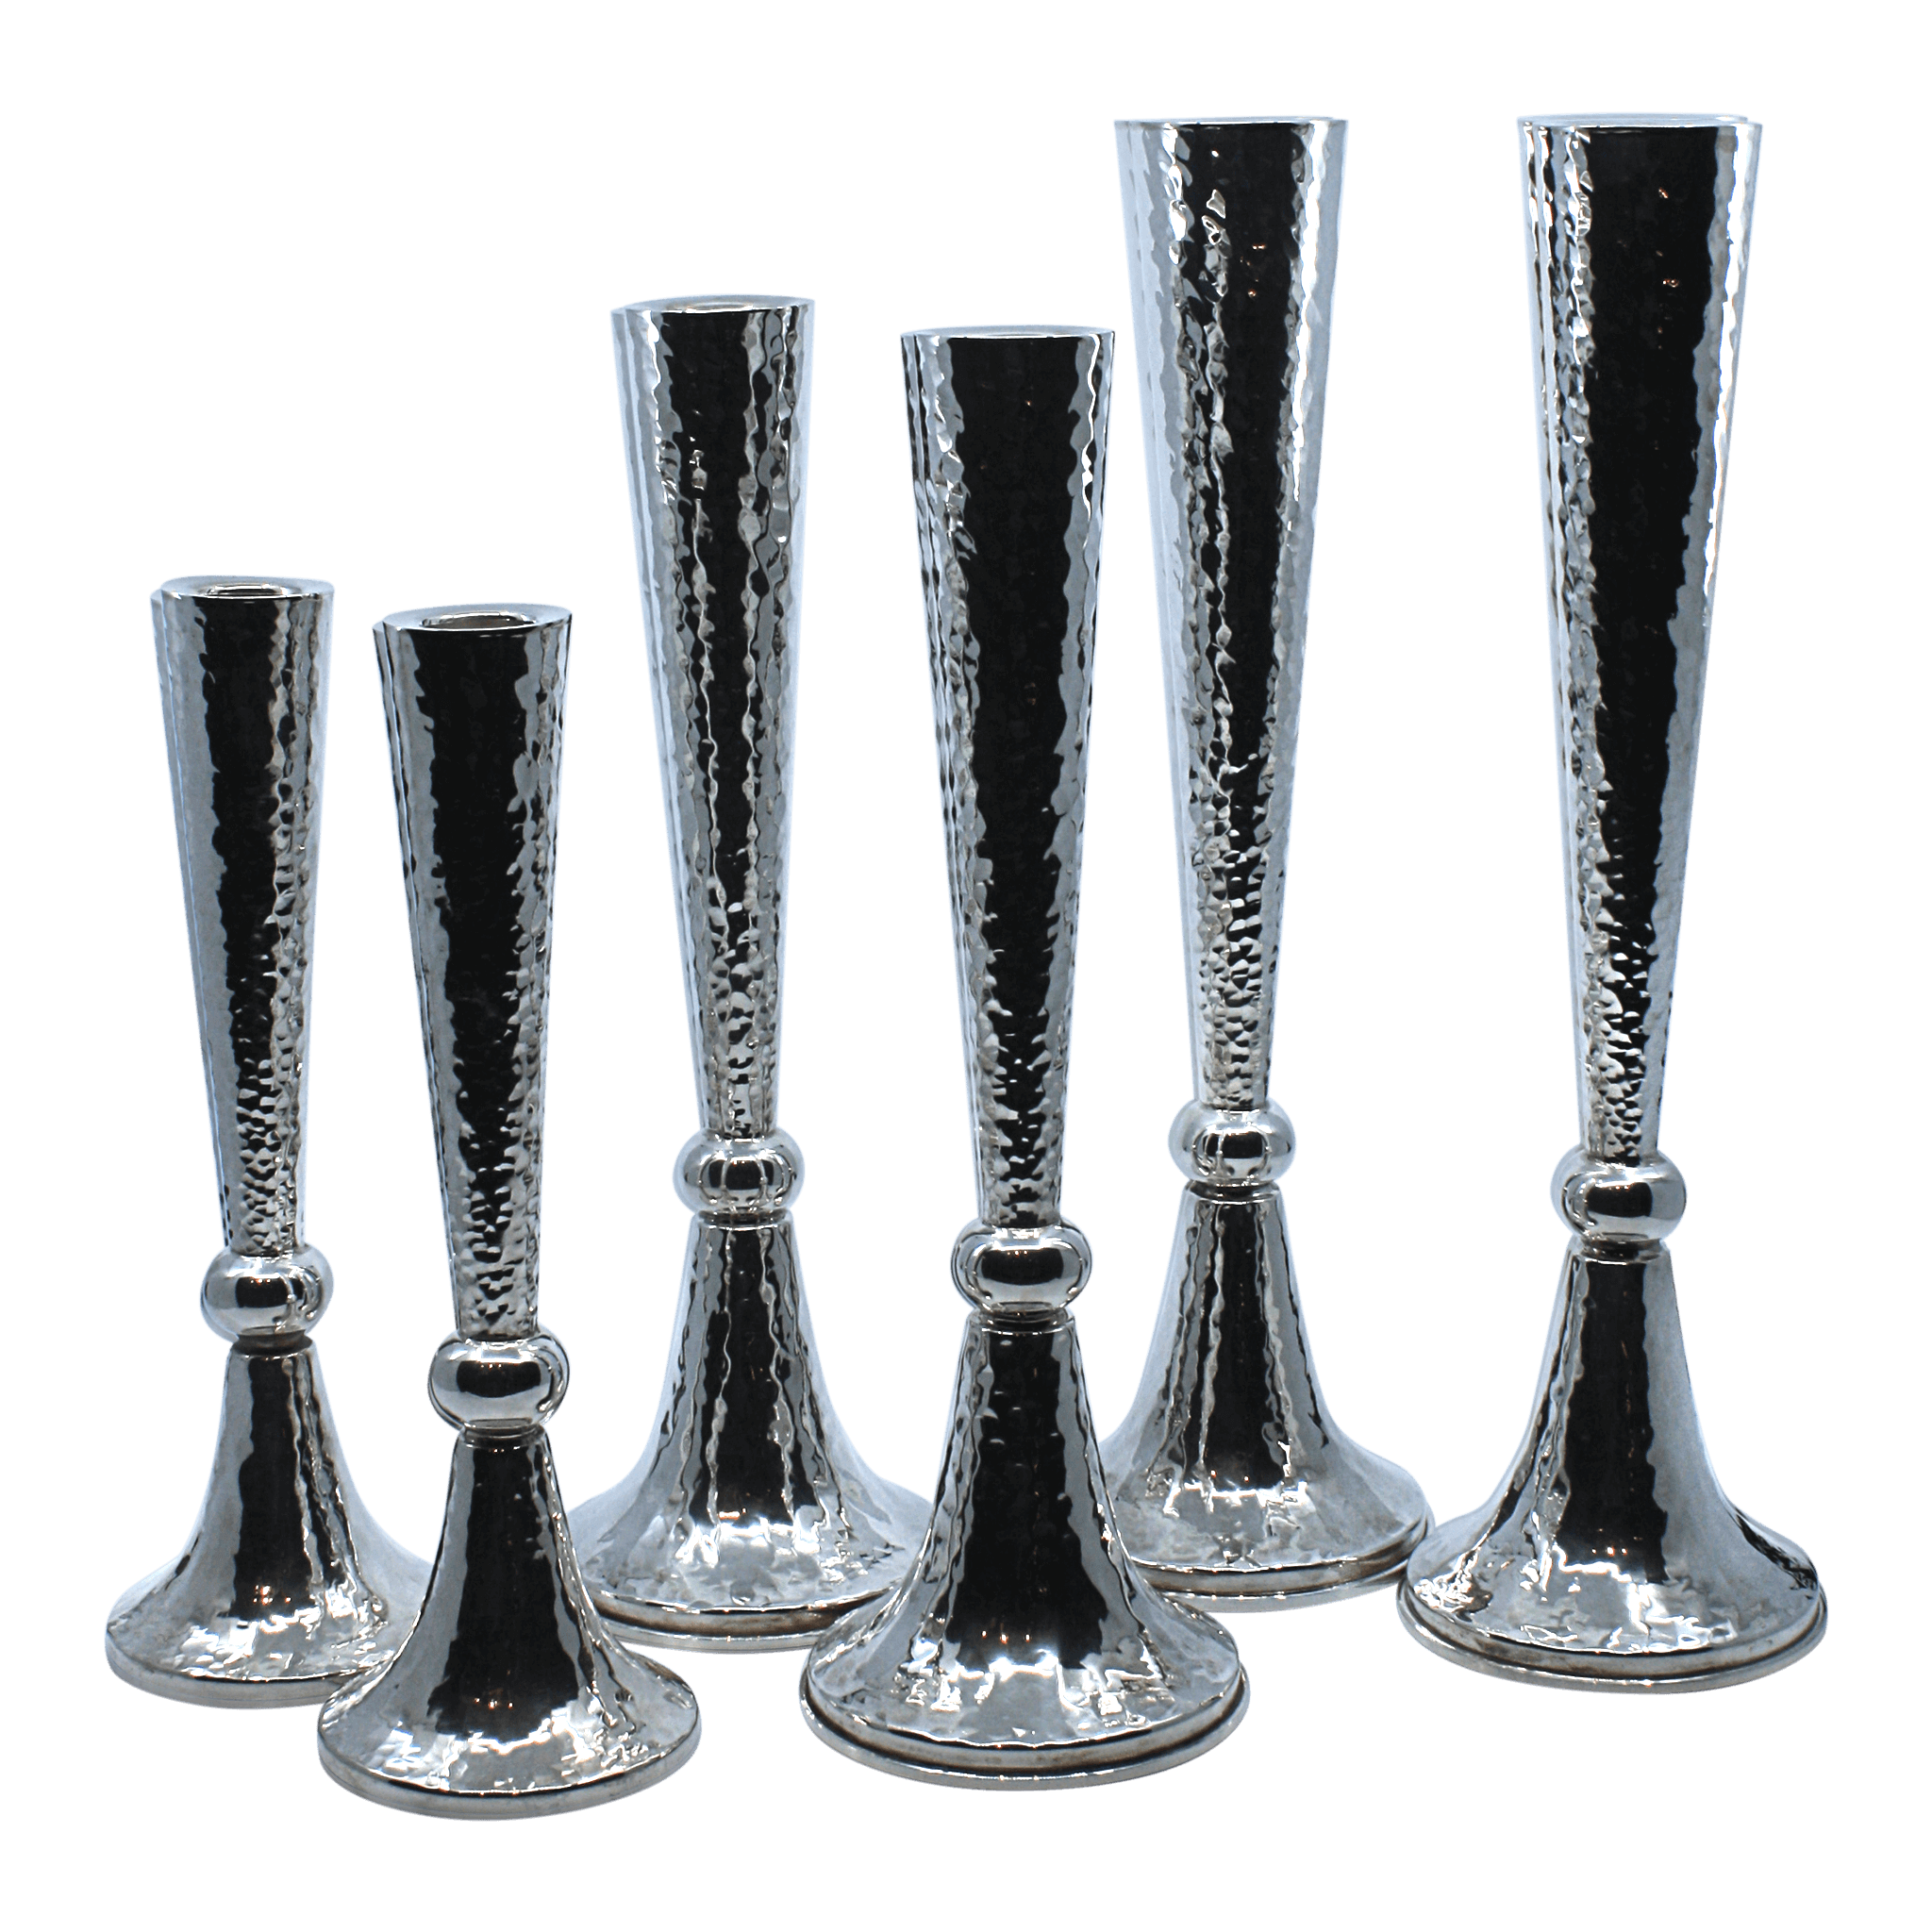 Classic Silver Hammered Candlesticks A - Piece By Zion Hadad